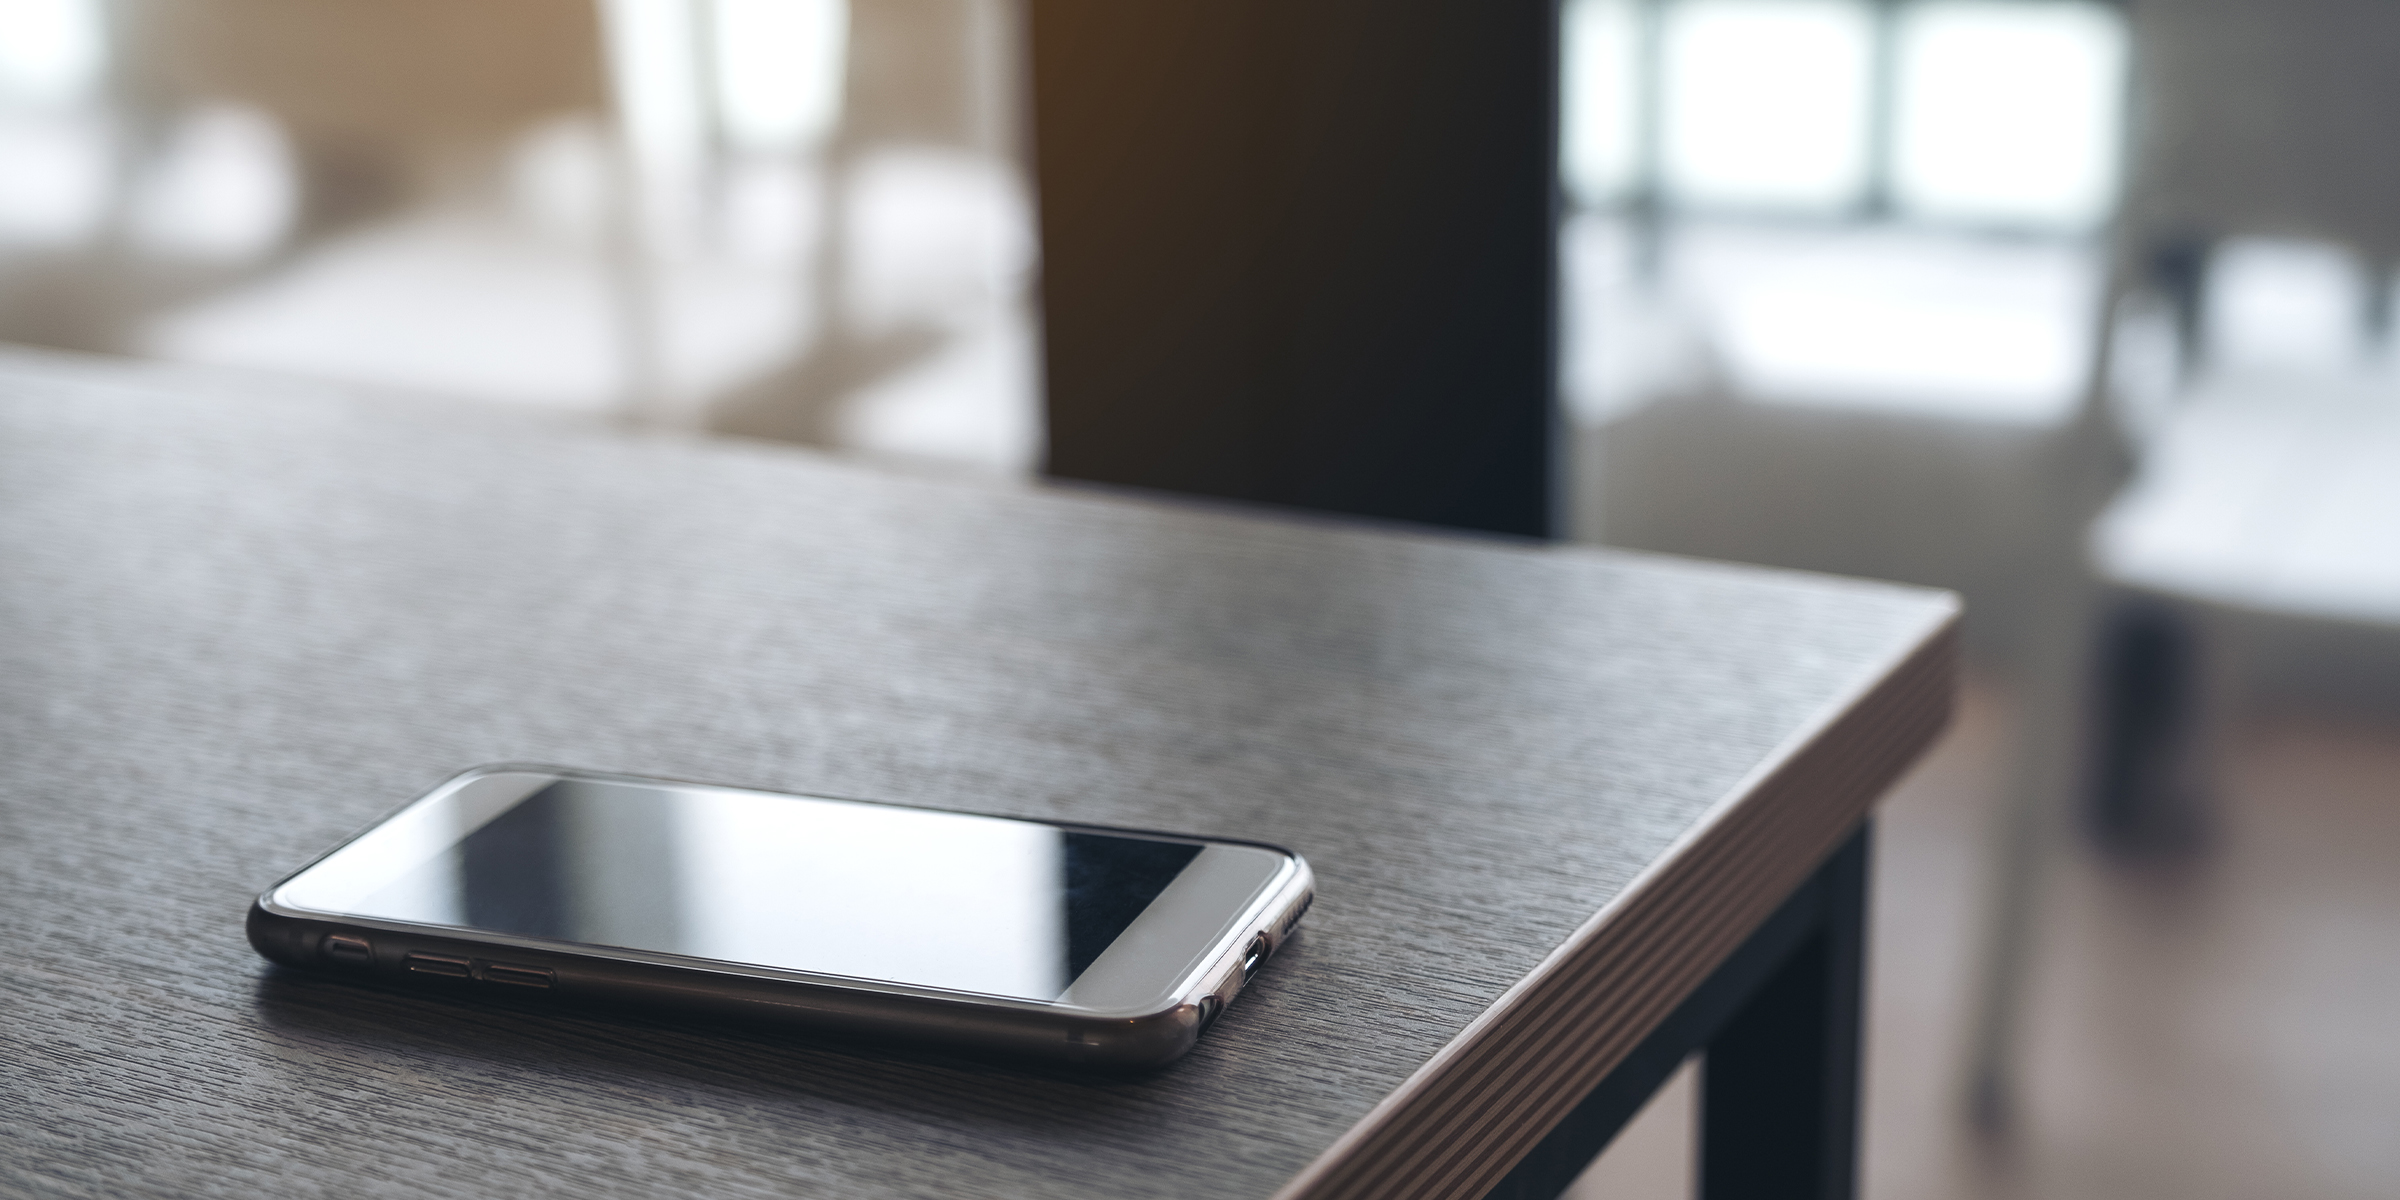 A smartphone on the table | Source: Shutterstock